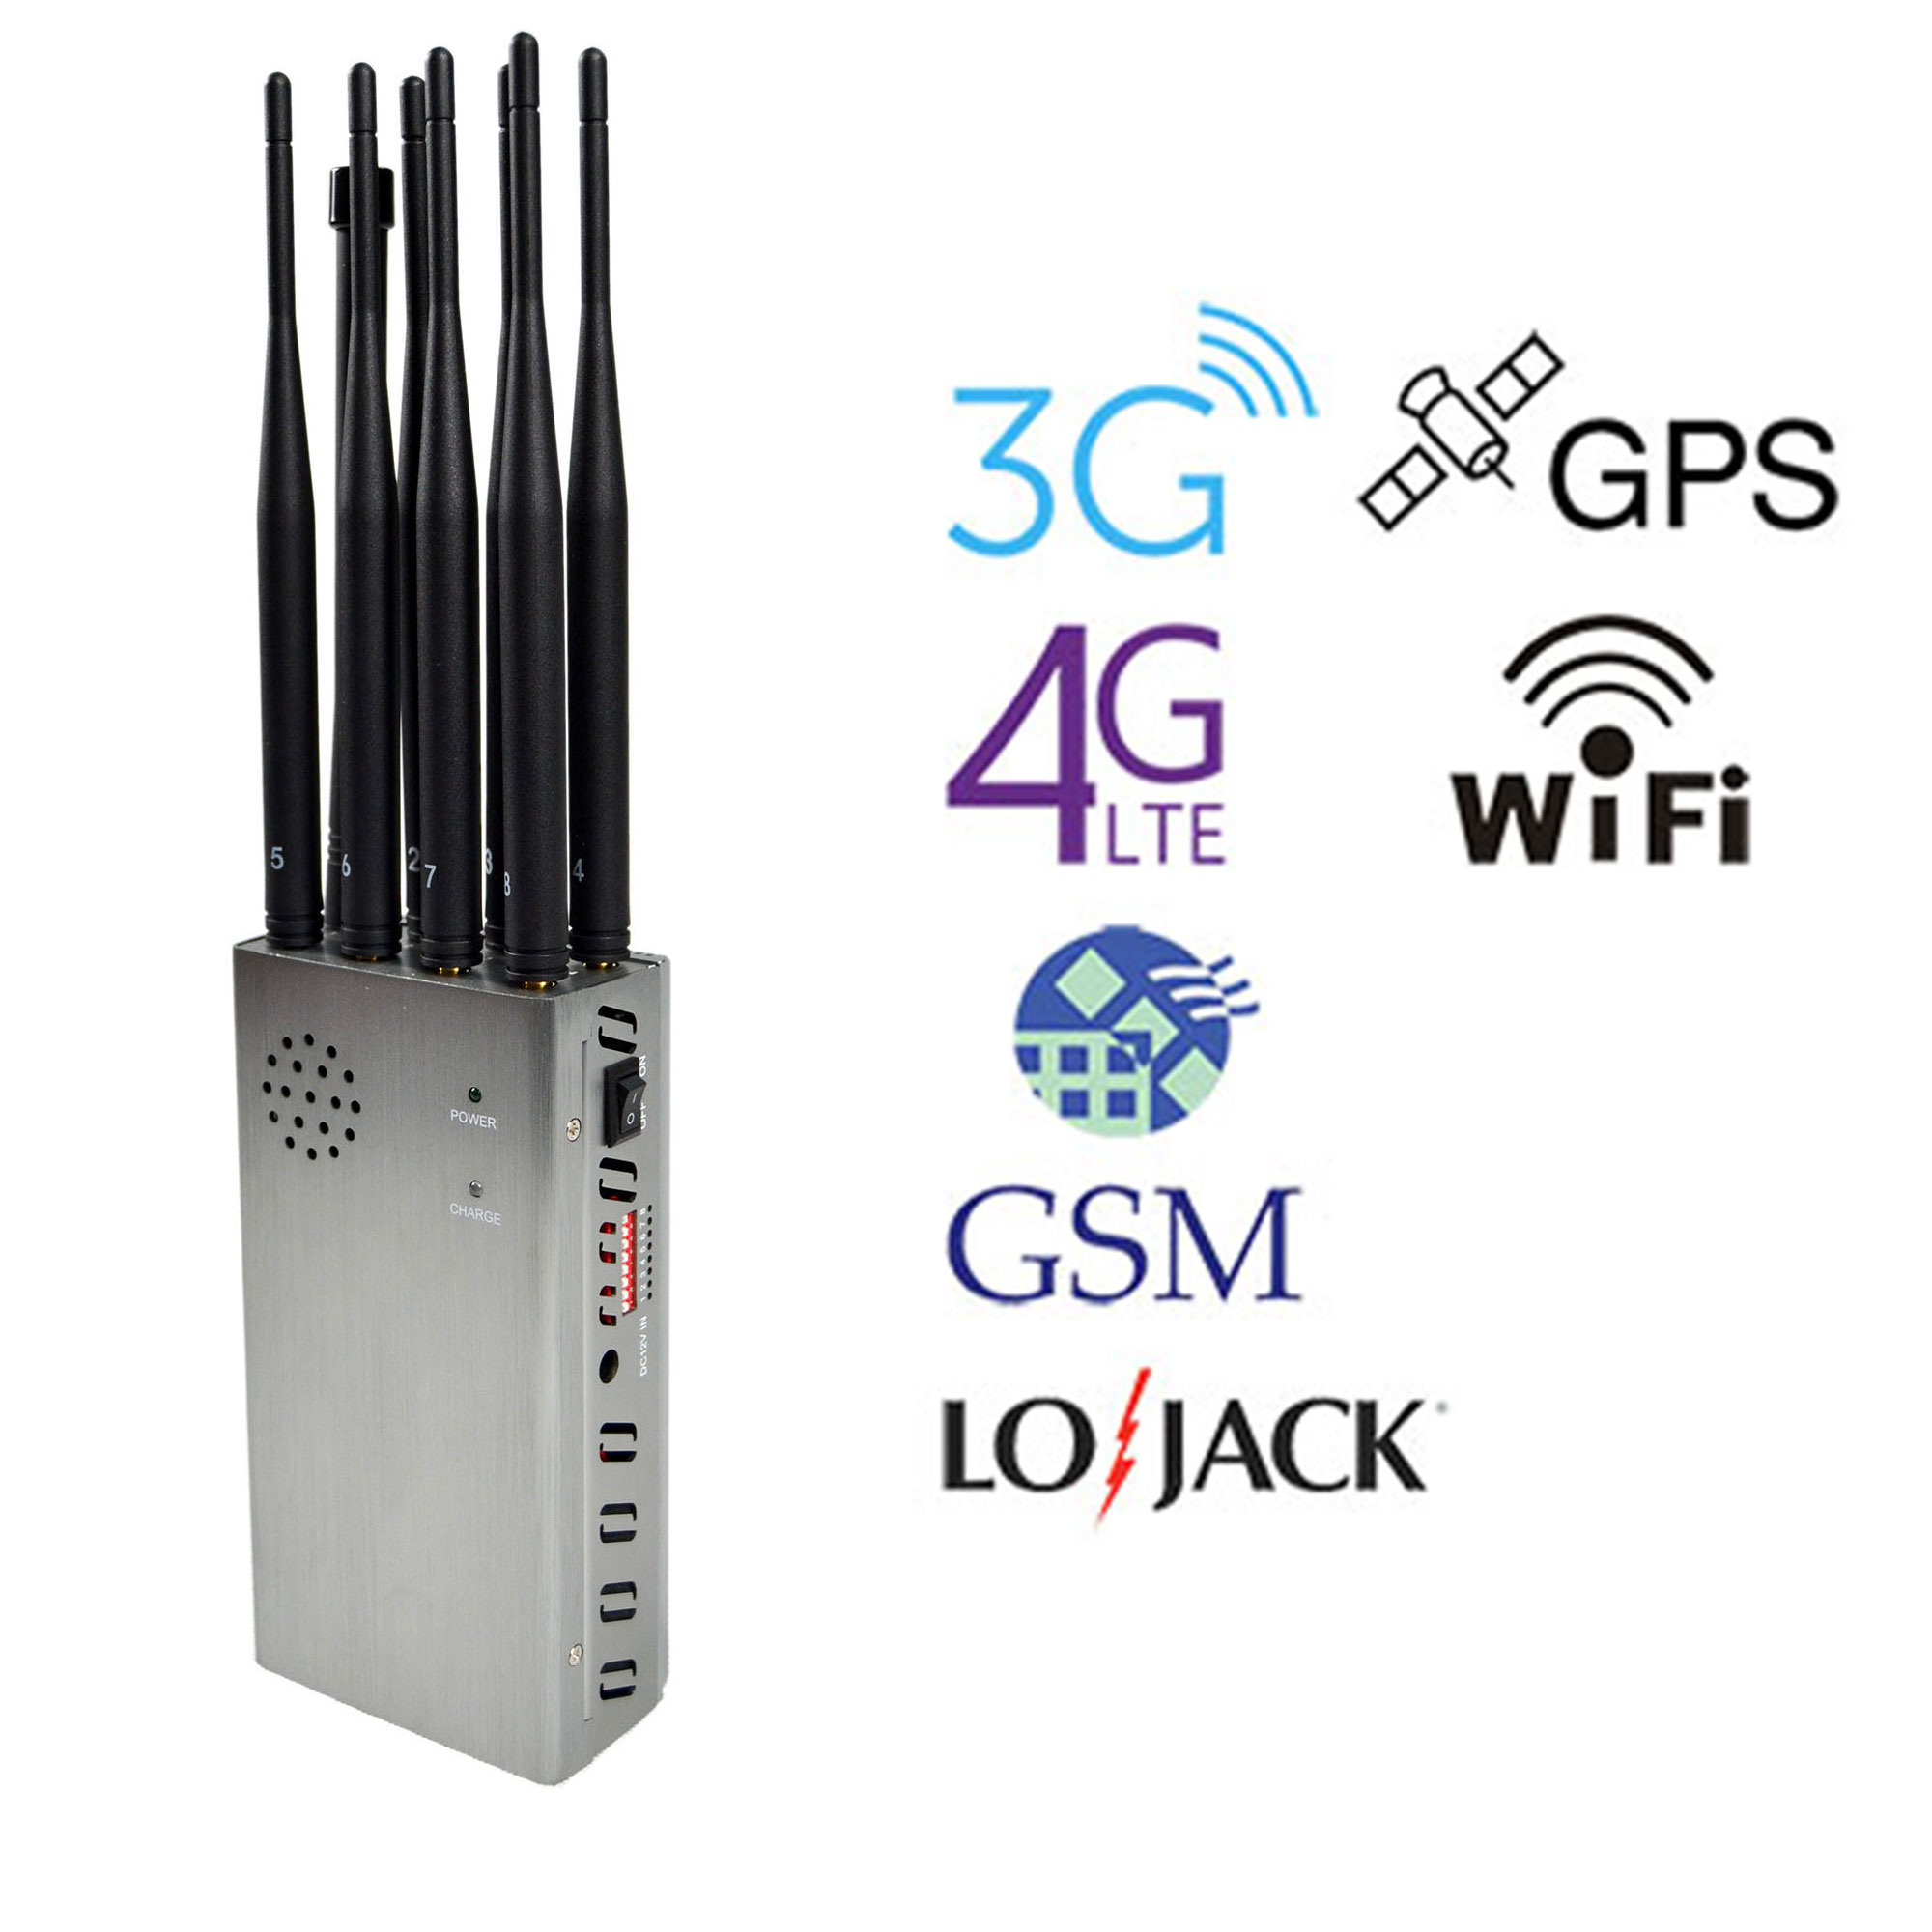 jammerill blog hosting free | Portable 8 Antennas Cell Phone Jammers With 2g 3G 4G And LOJACK GPS WIFI Signals